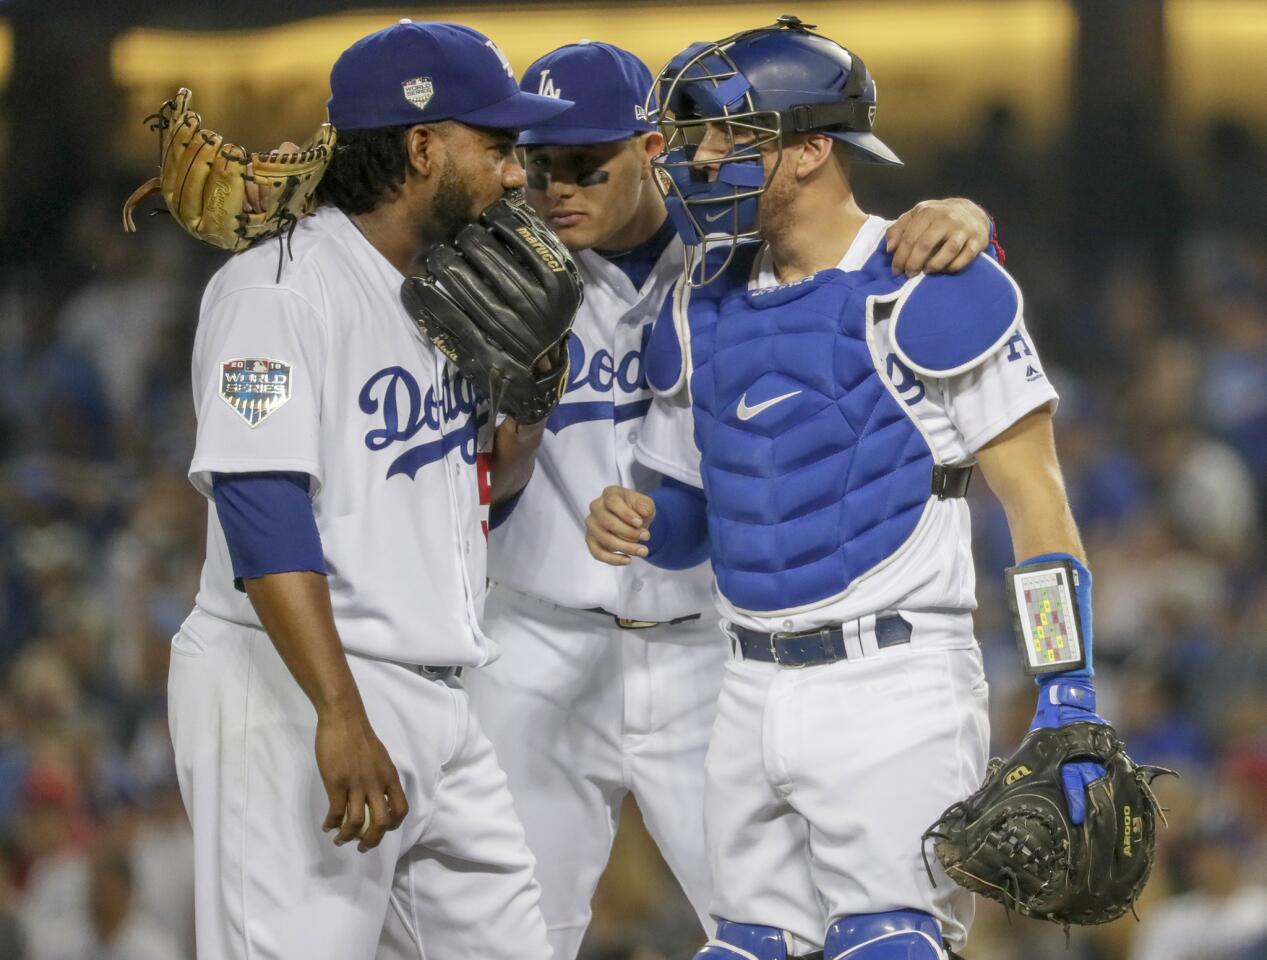 Pedro Baez, Manny Machado and Austin Barnes meet on the mound in the tenth inning.